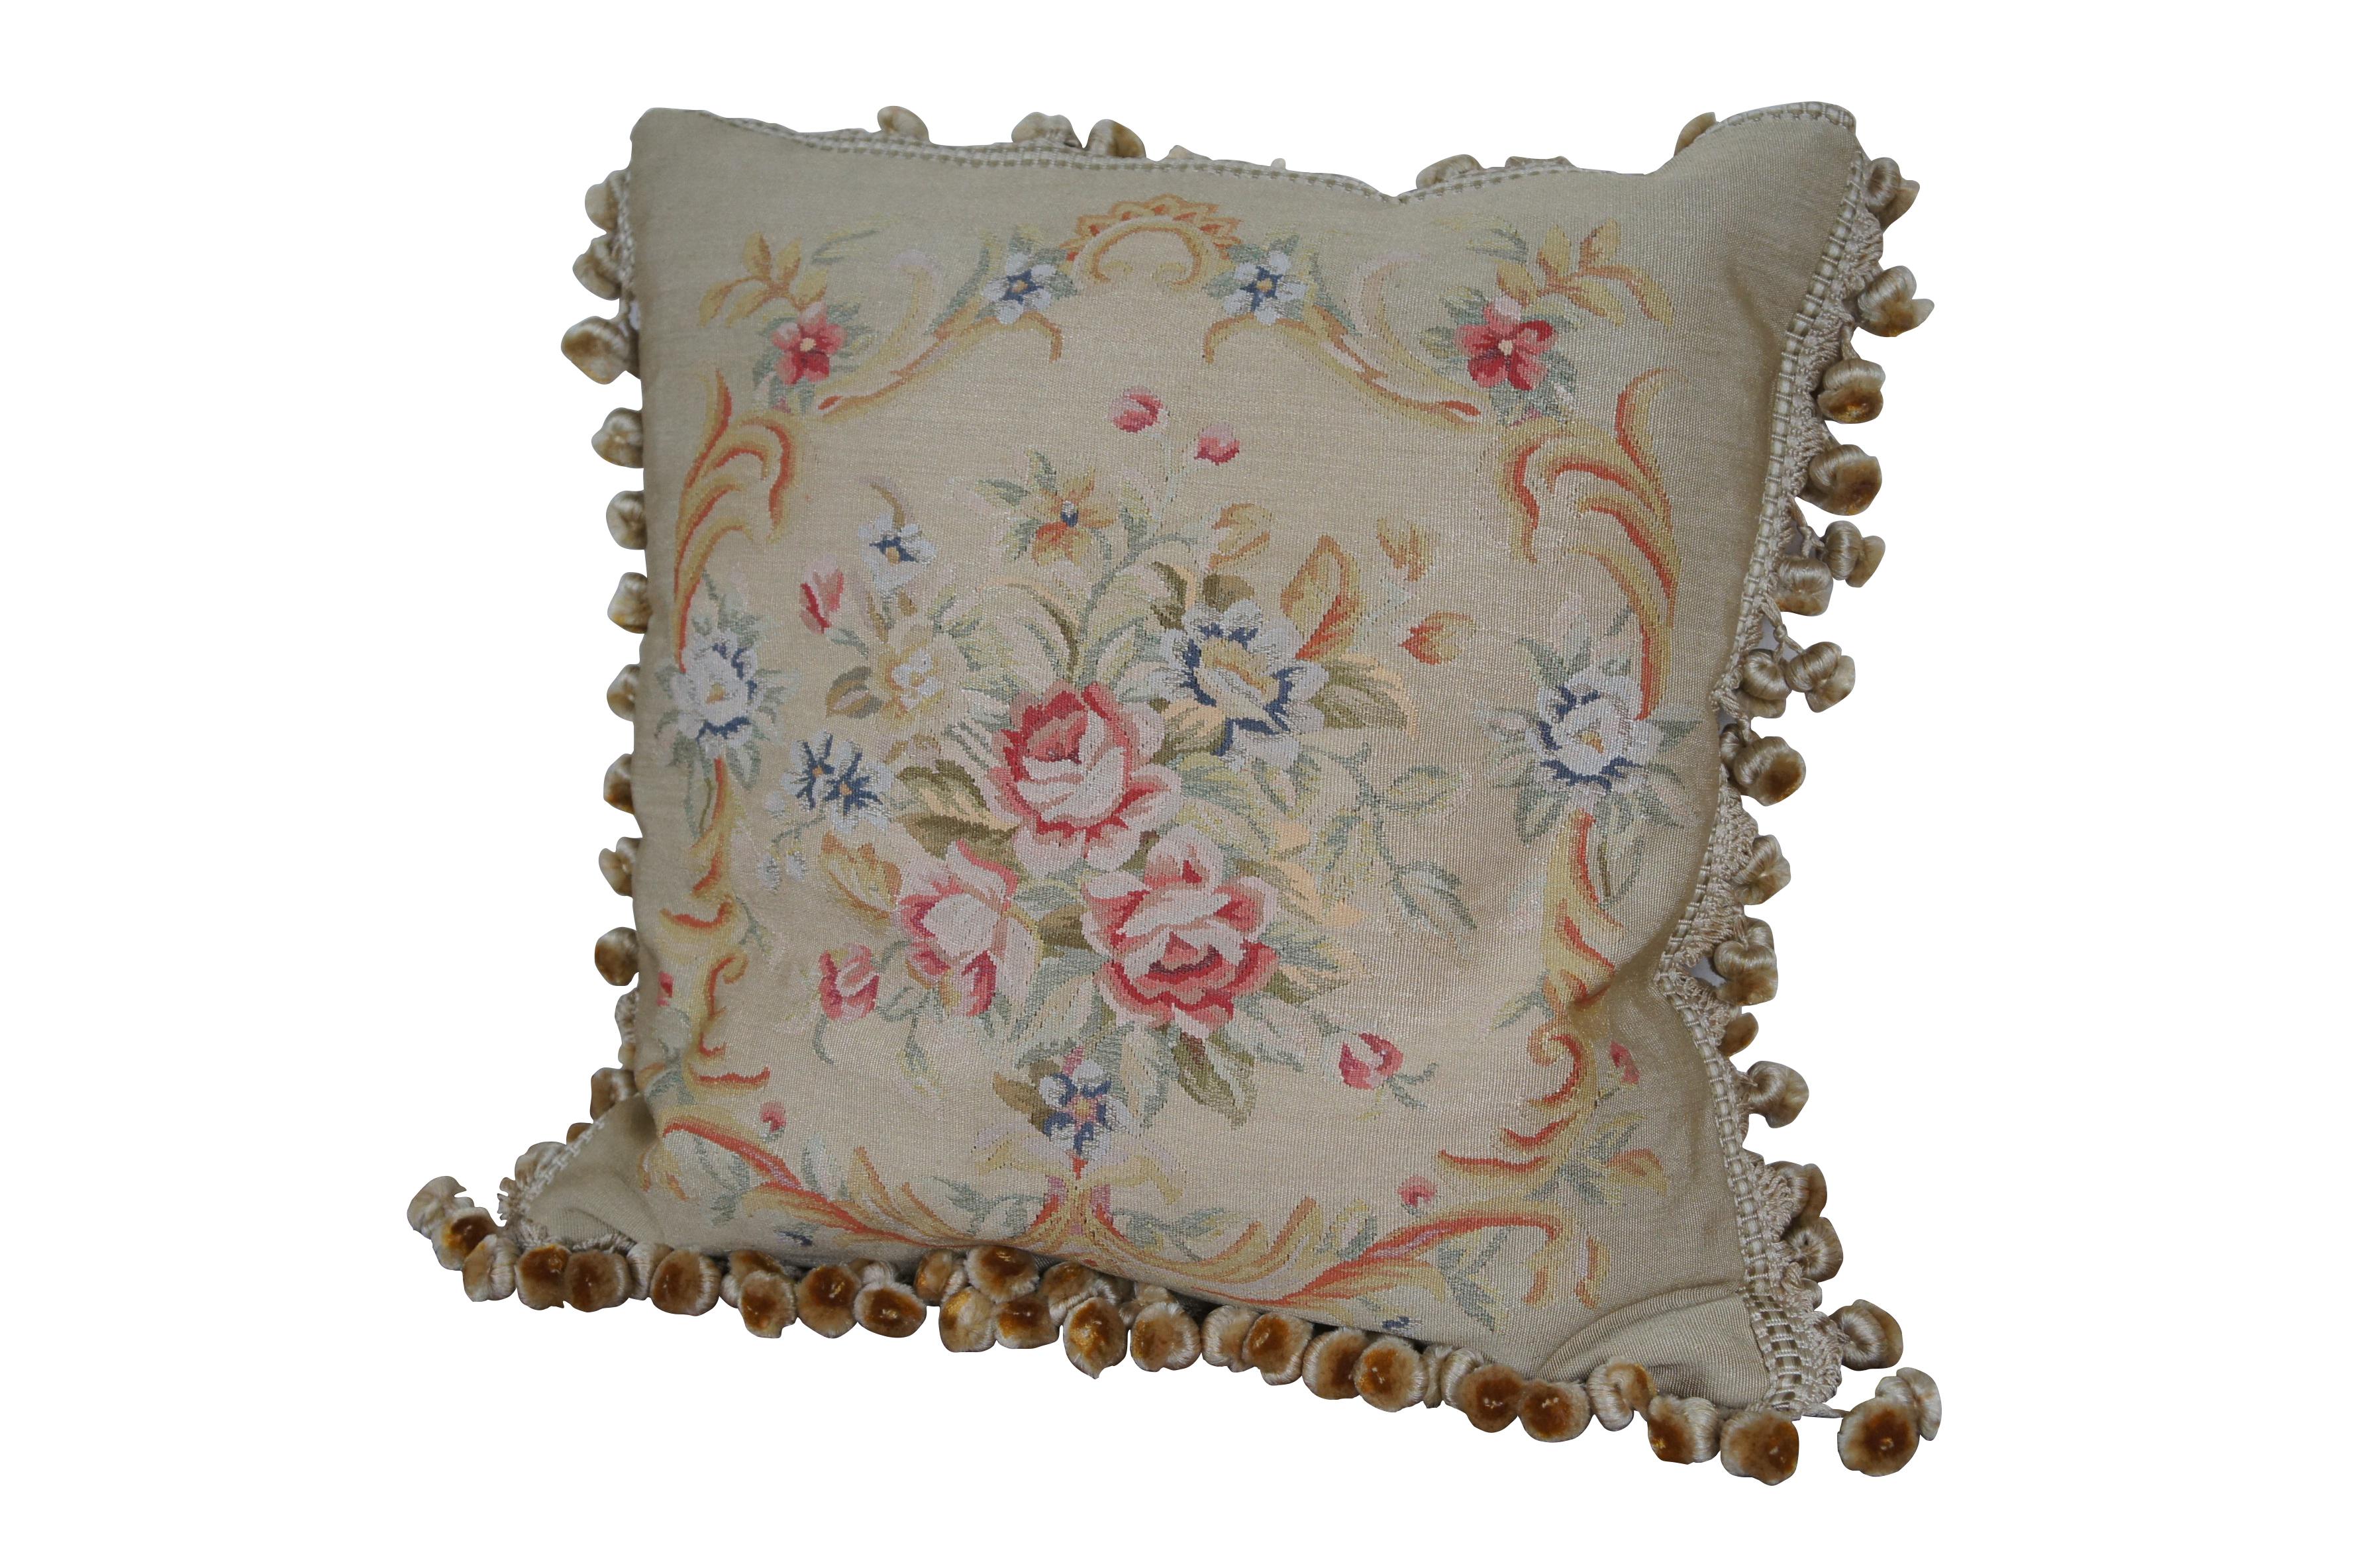 20th century square Aubusson style throw pillow, embroidered in silk with a bouquet of pink and blue flowers, surrounded by a swirling, golden, foliate frame. Cream ball tassel trim. Light brown velour back with zipper closure. Down filled. Made in